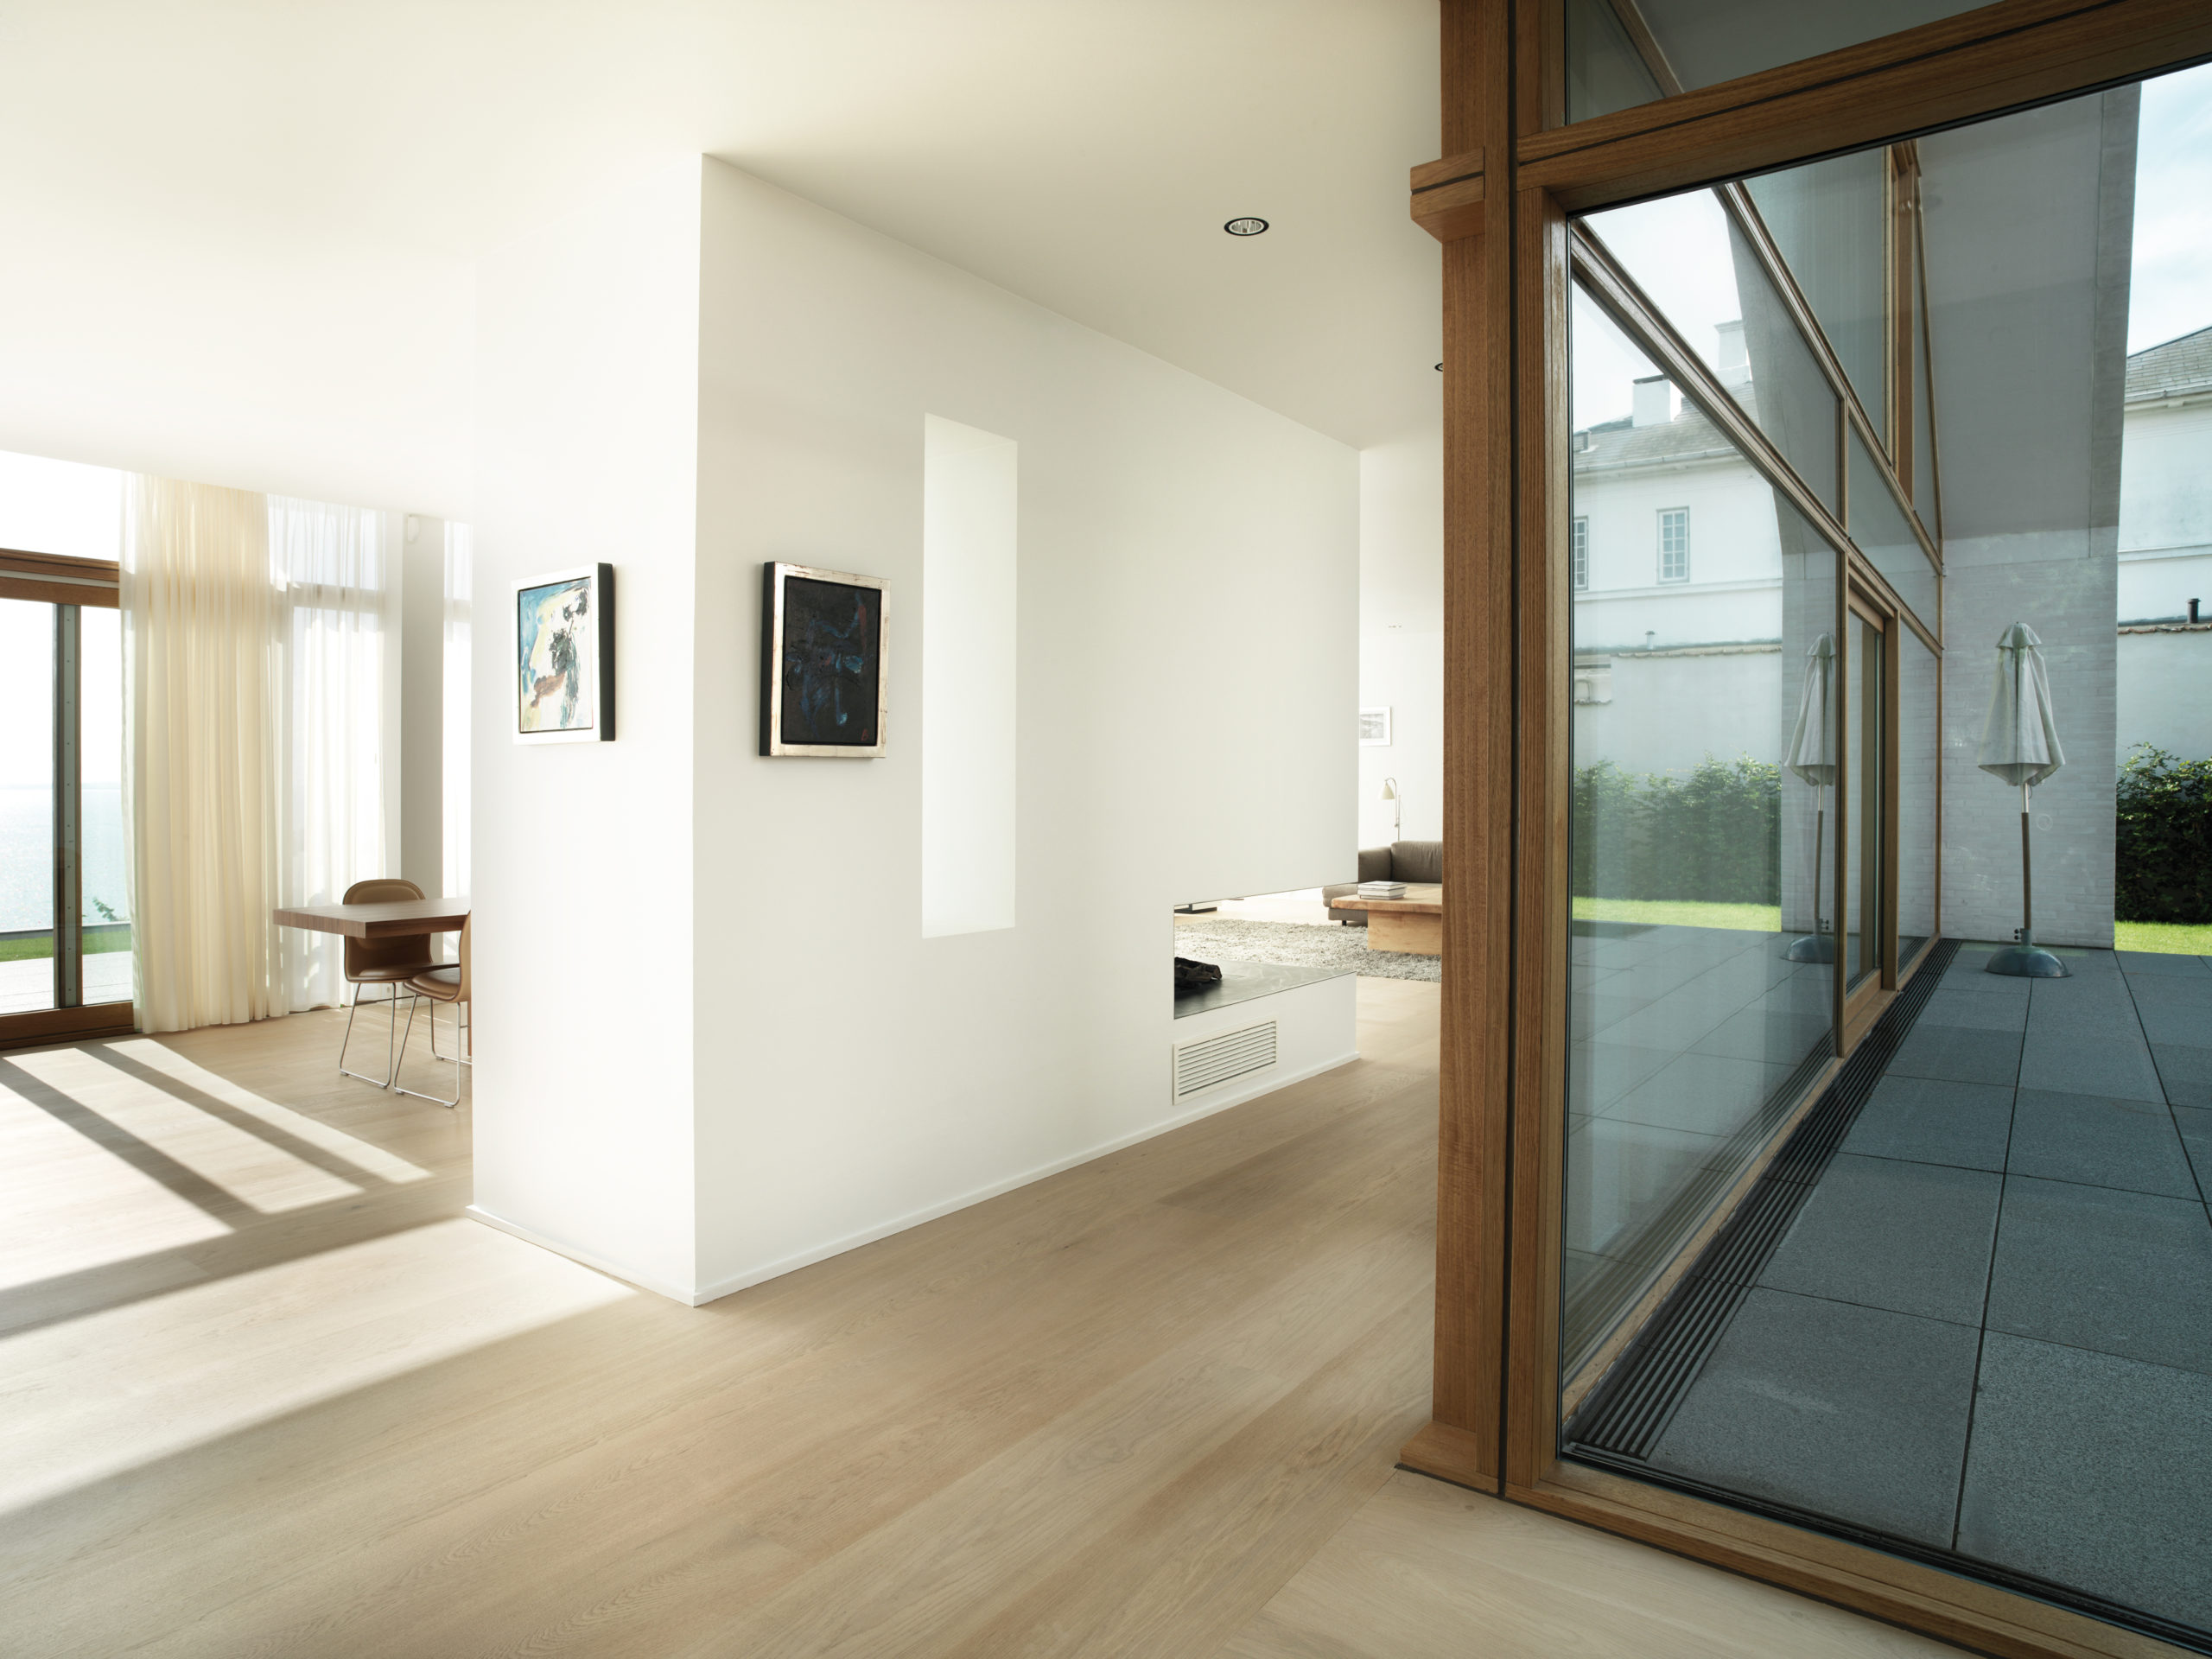 The Beauty of Wood: Why Architects Love Dinesen